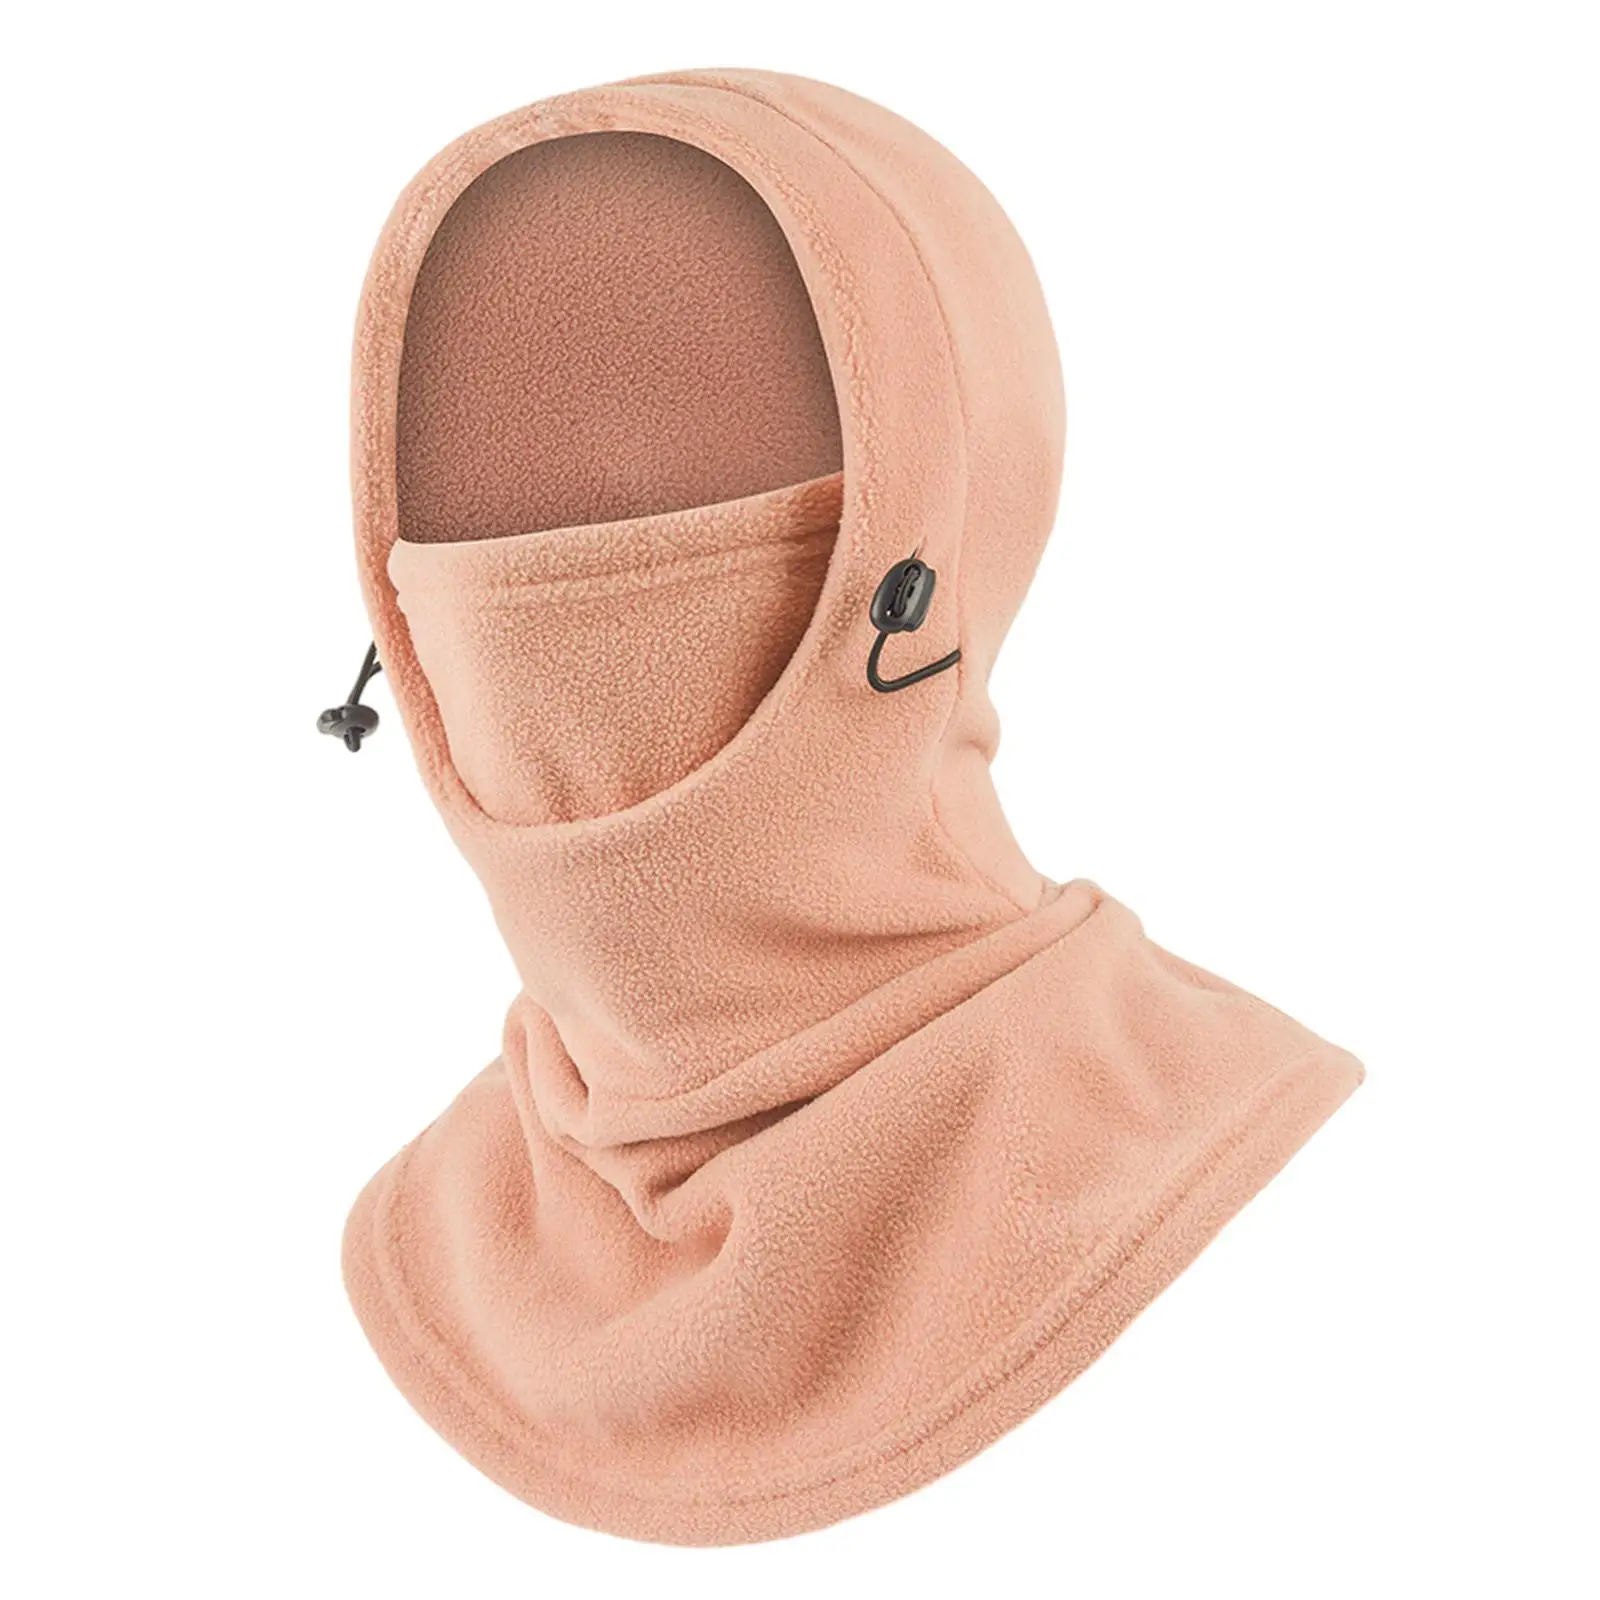 Winter Balaclava Thermal Warm Hood for Hiking Motorcycle Accessories Fishing